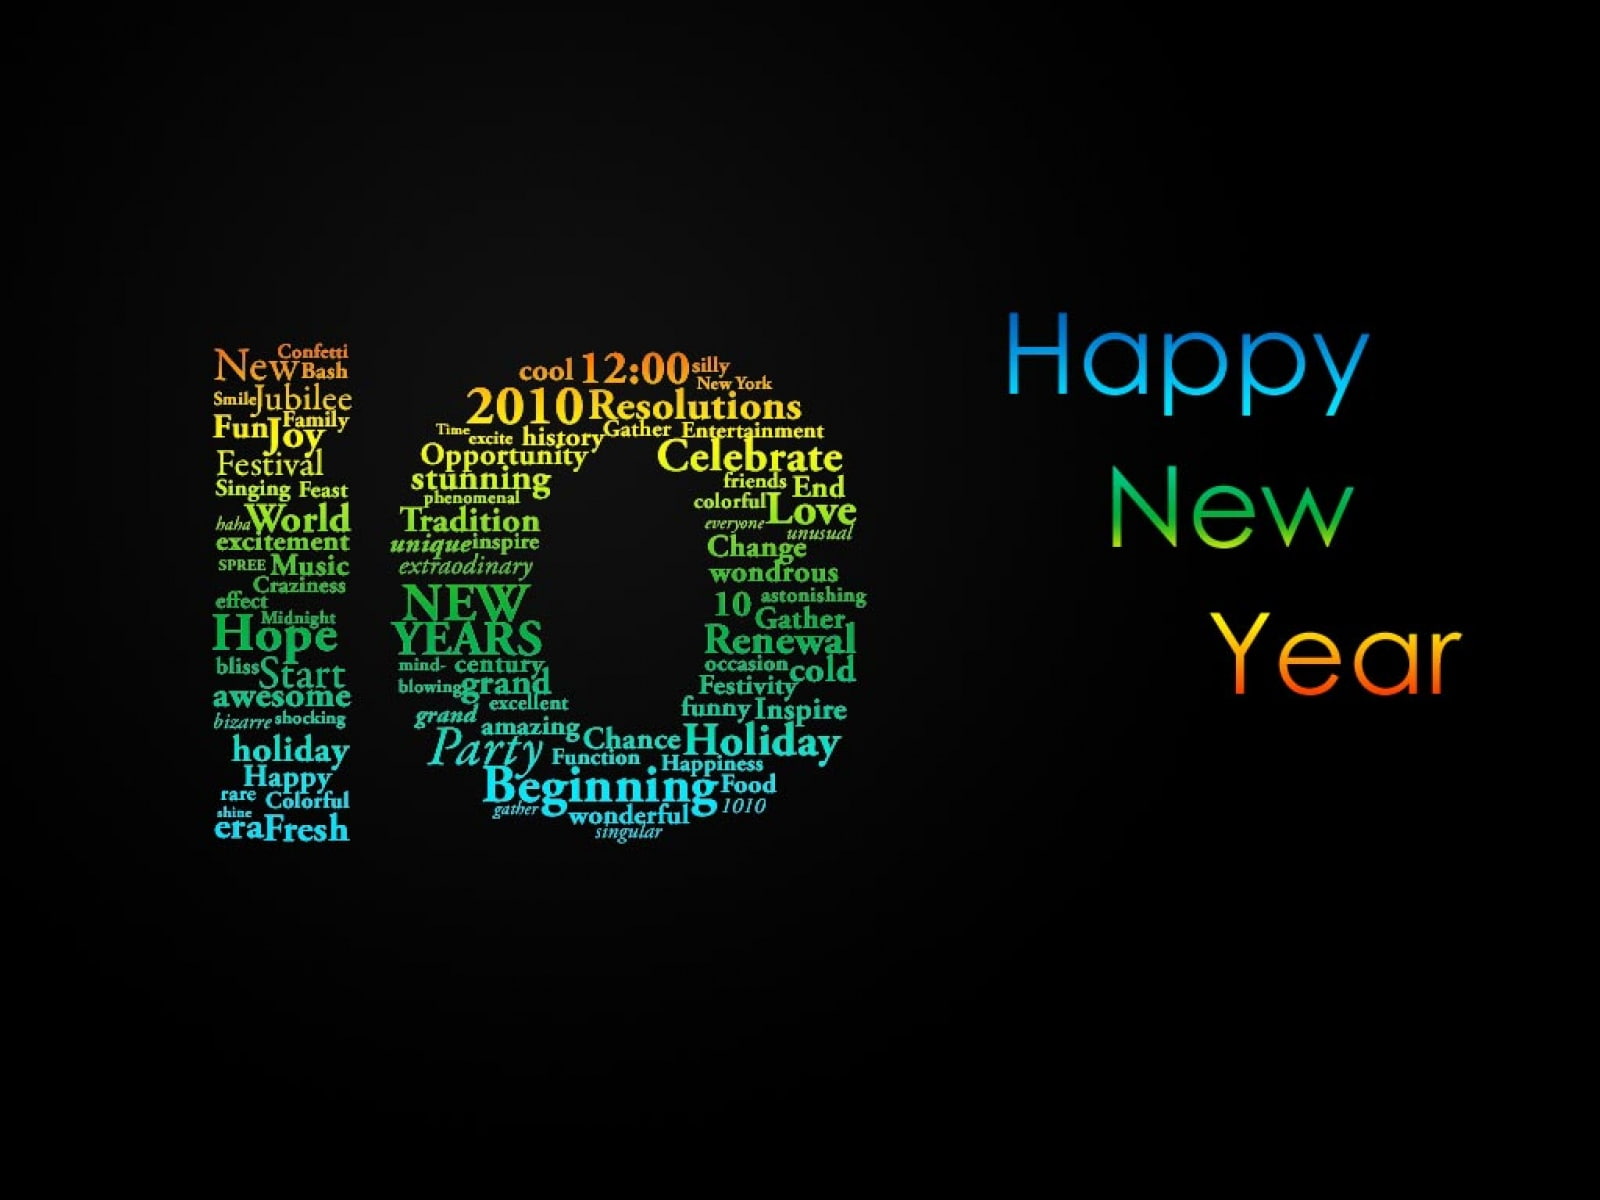 Welcome New Year 2010 HD, happy new year text, celebrations